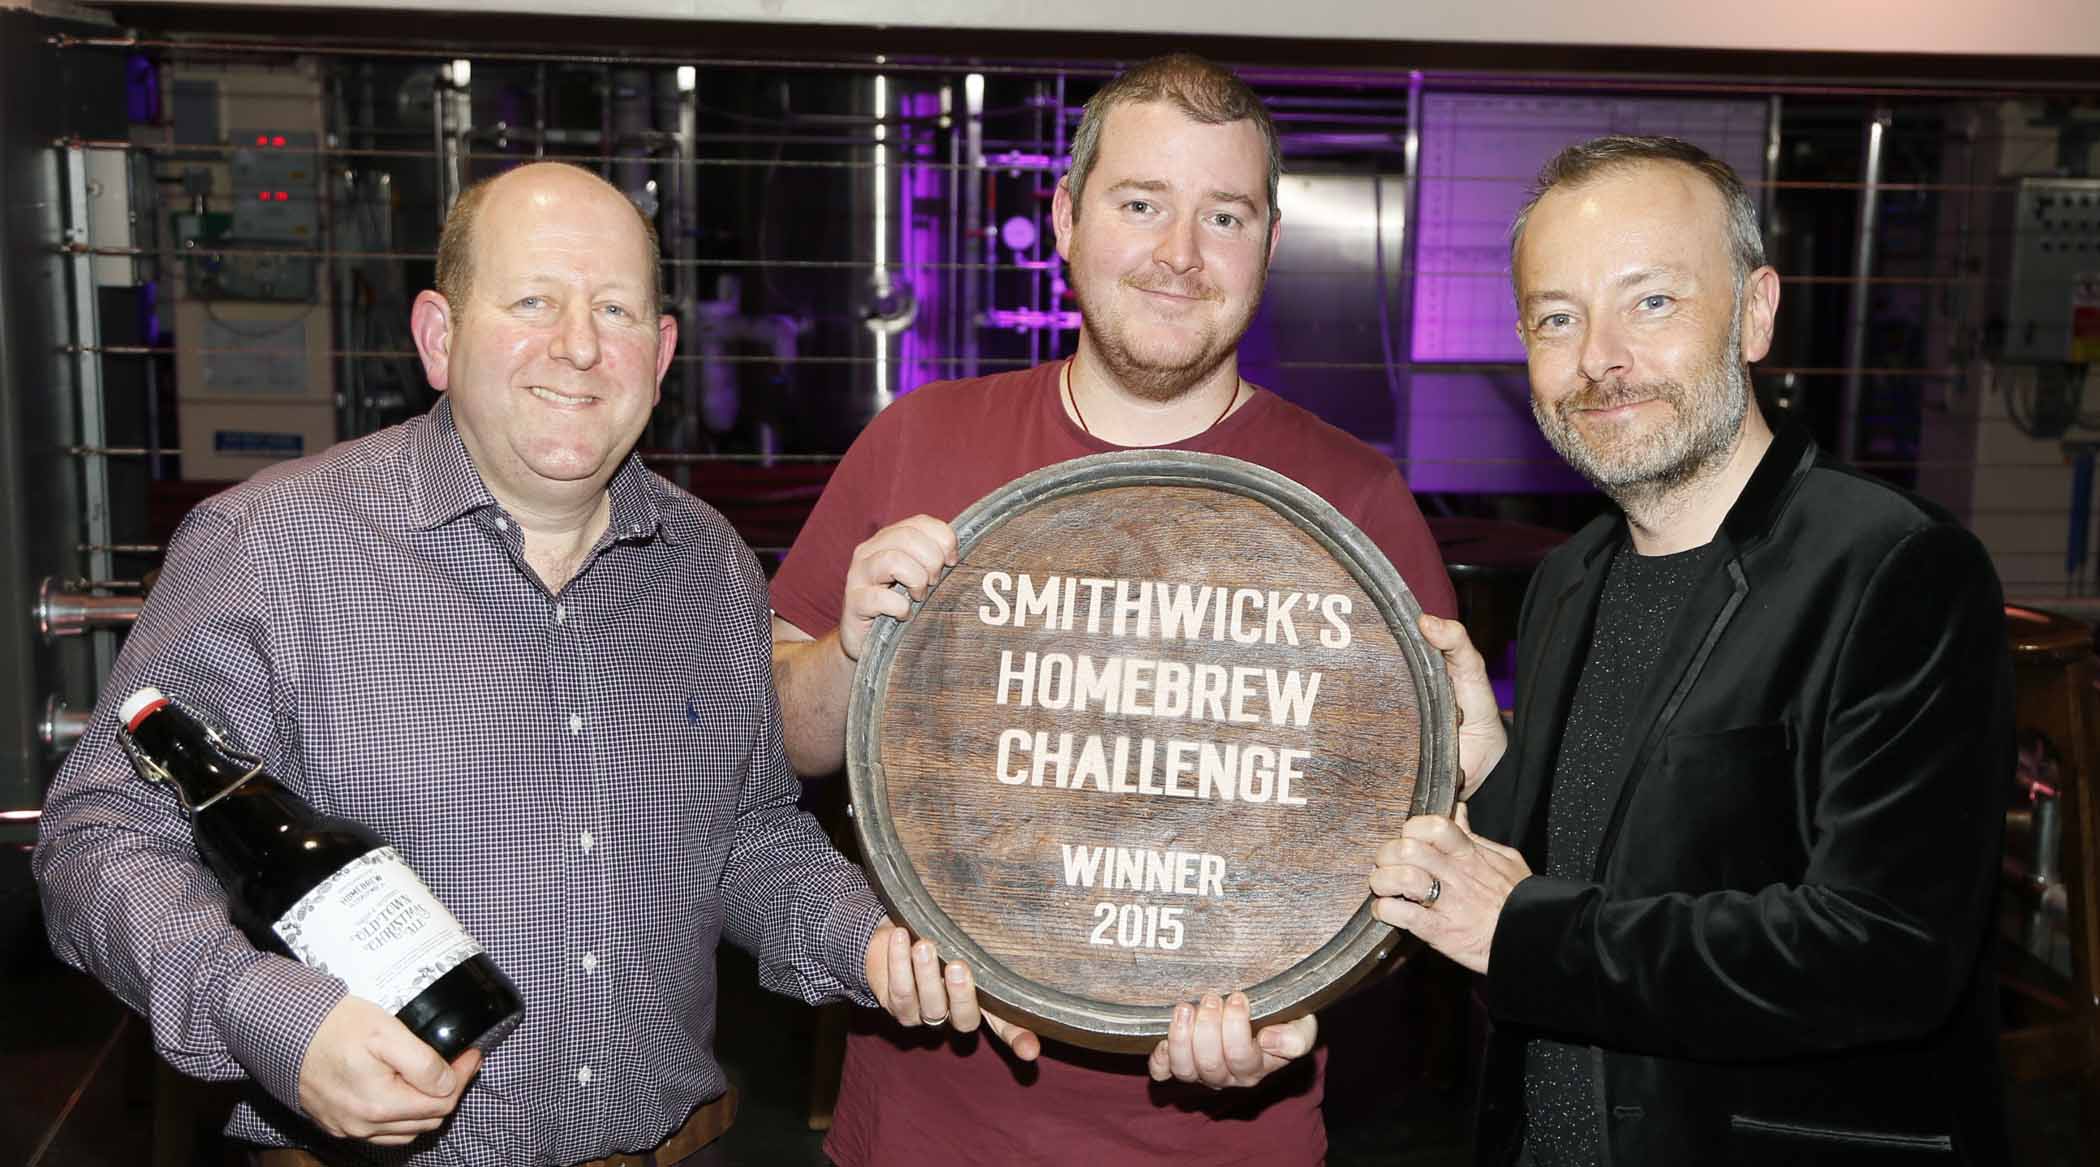 From left: Winners Brian Mooney and Stephen Ryan with radio personality Rick O'Shea at the Smithwick’s Homebrew Challenge Finalé held at the Open Gate Brewery recently.